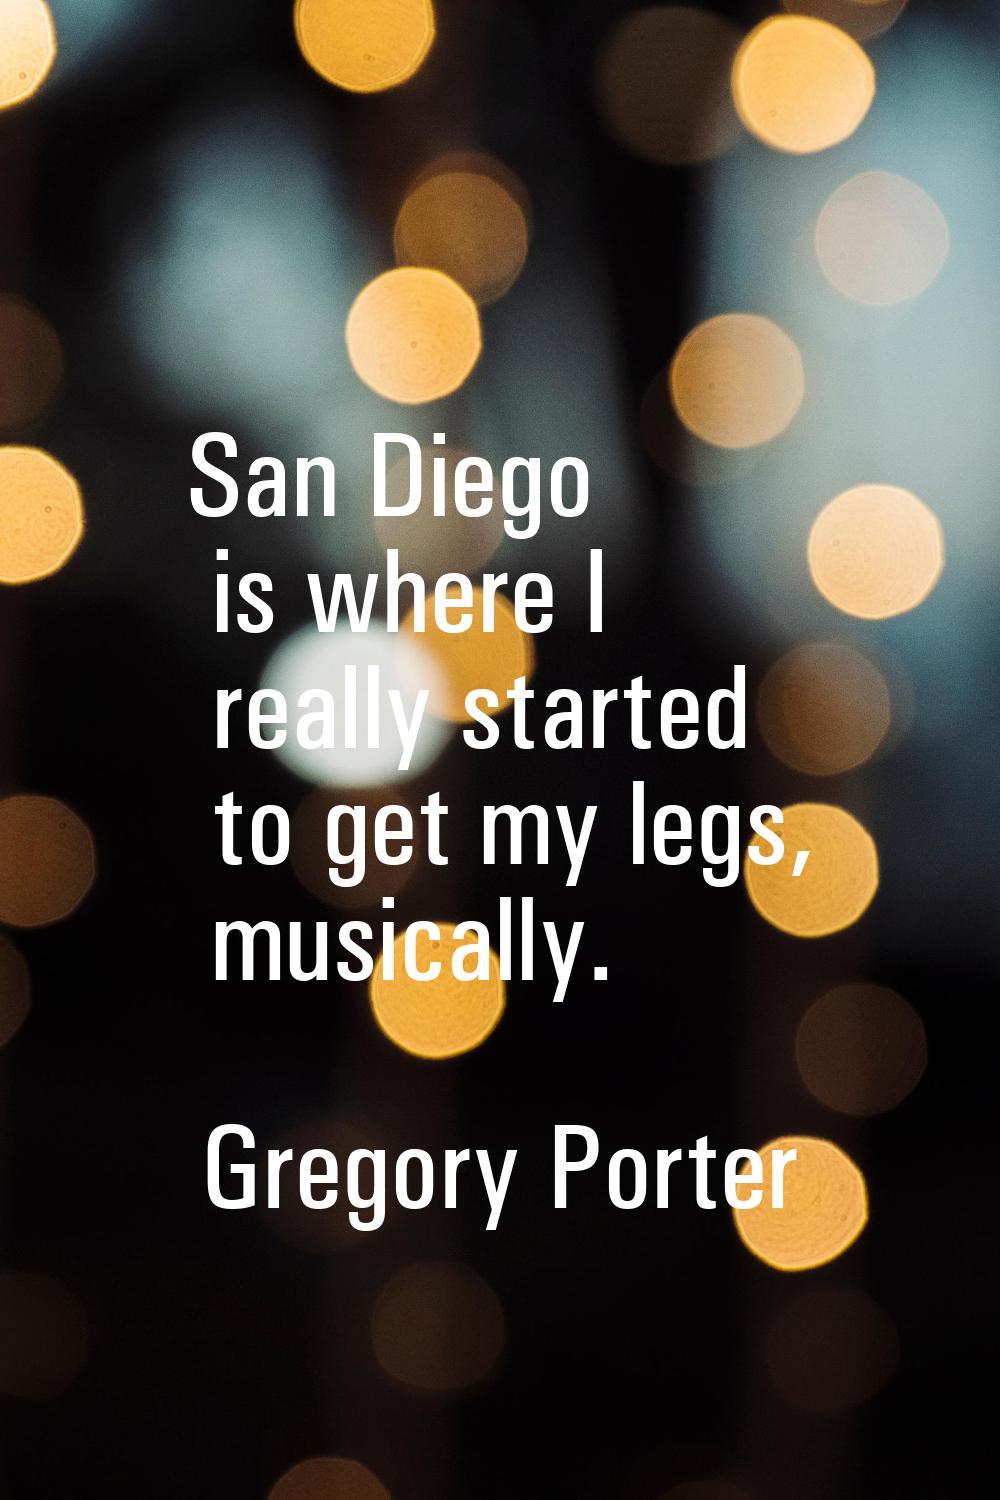 San Diego is where I really started to get my legs, musically.